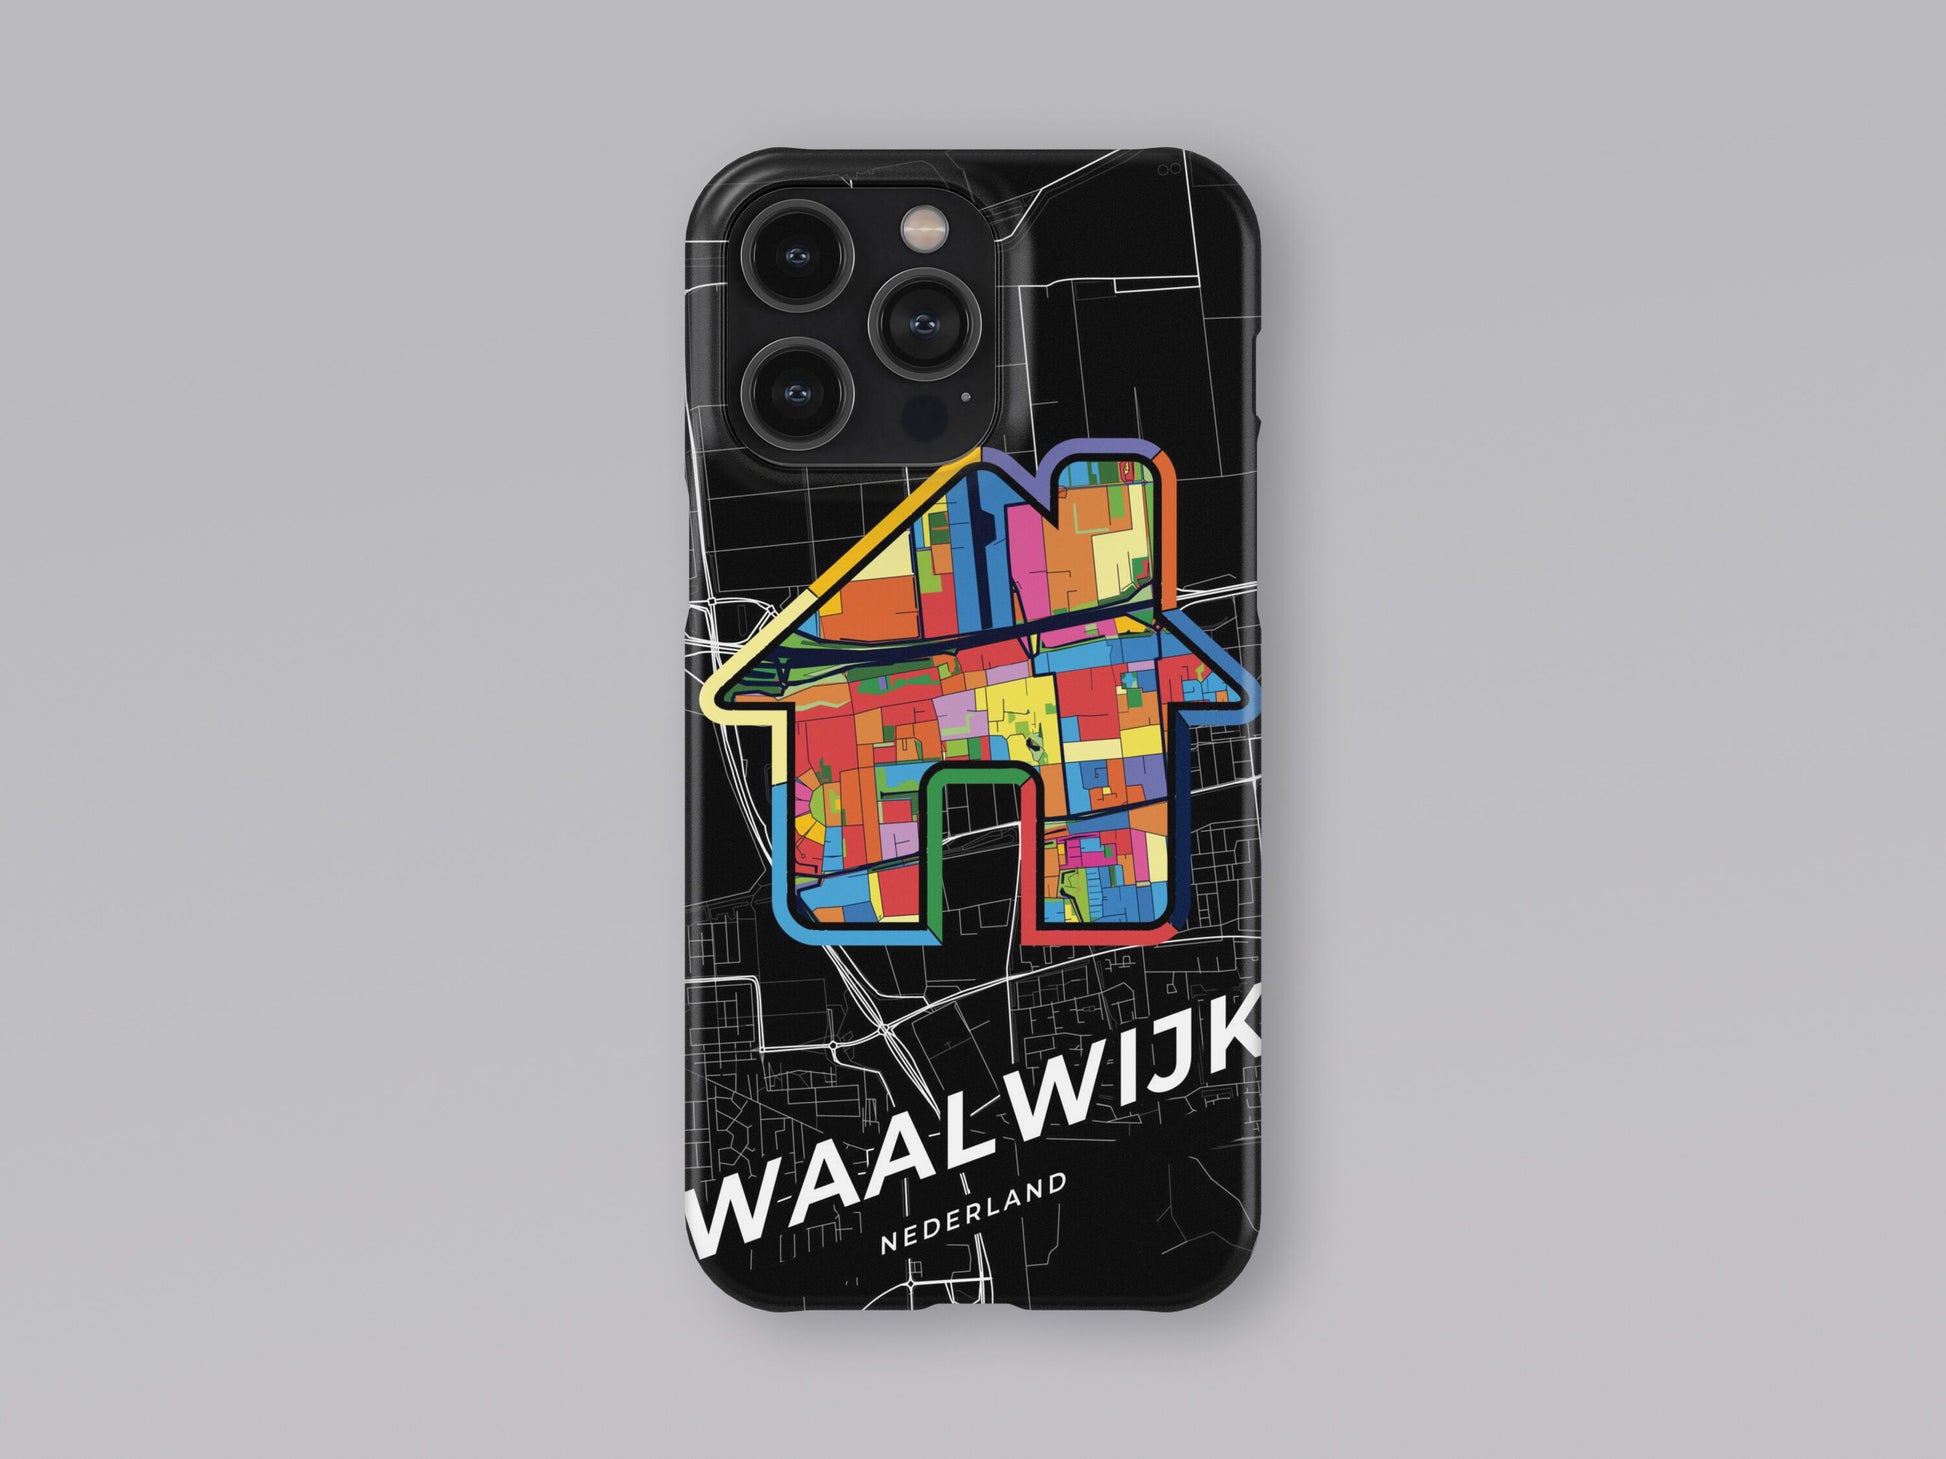 Waalwijk Netherlands slim phone case with colorful icon 3